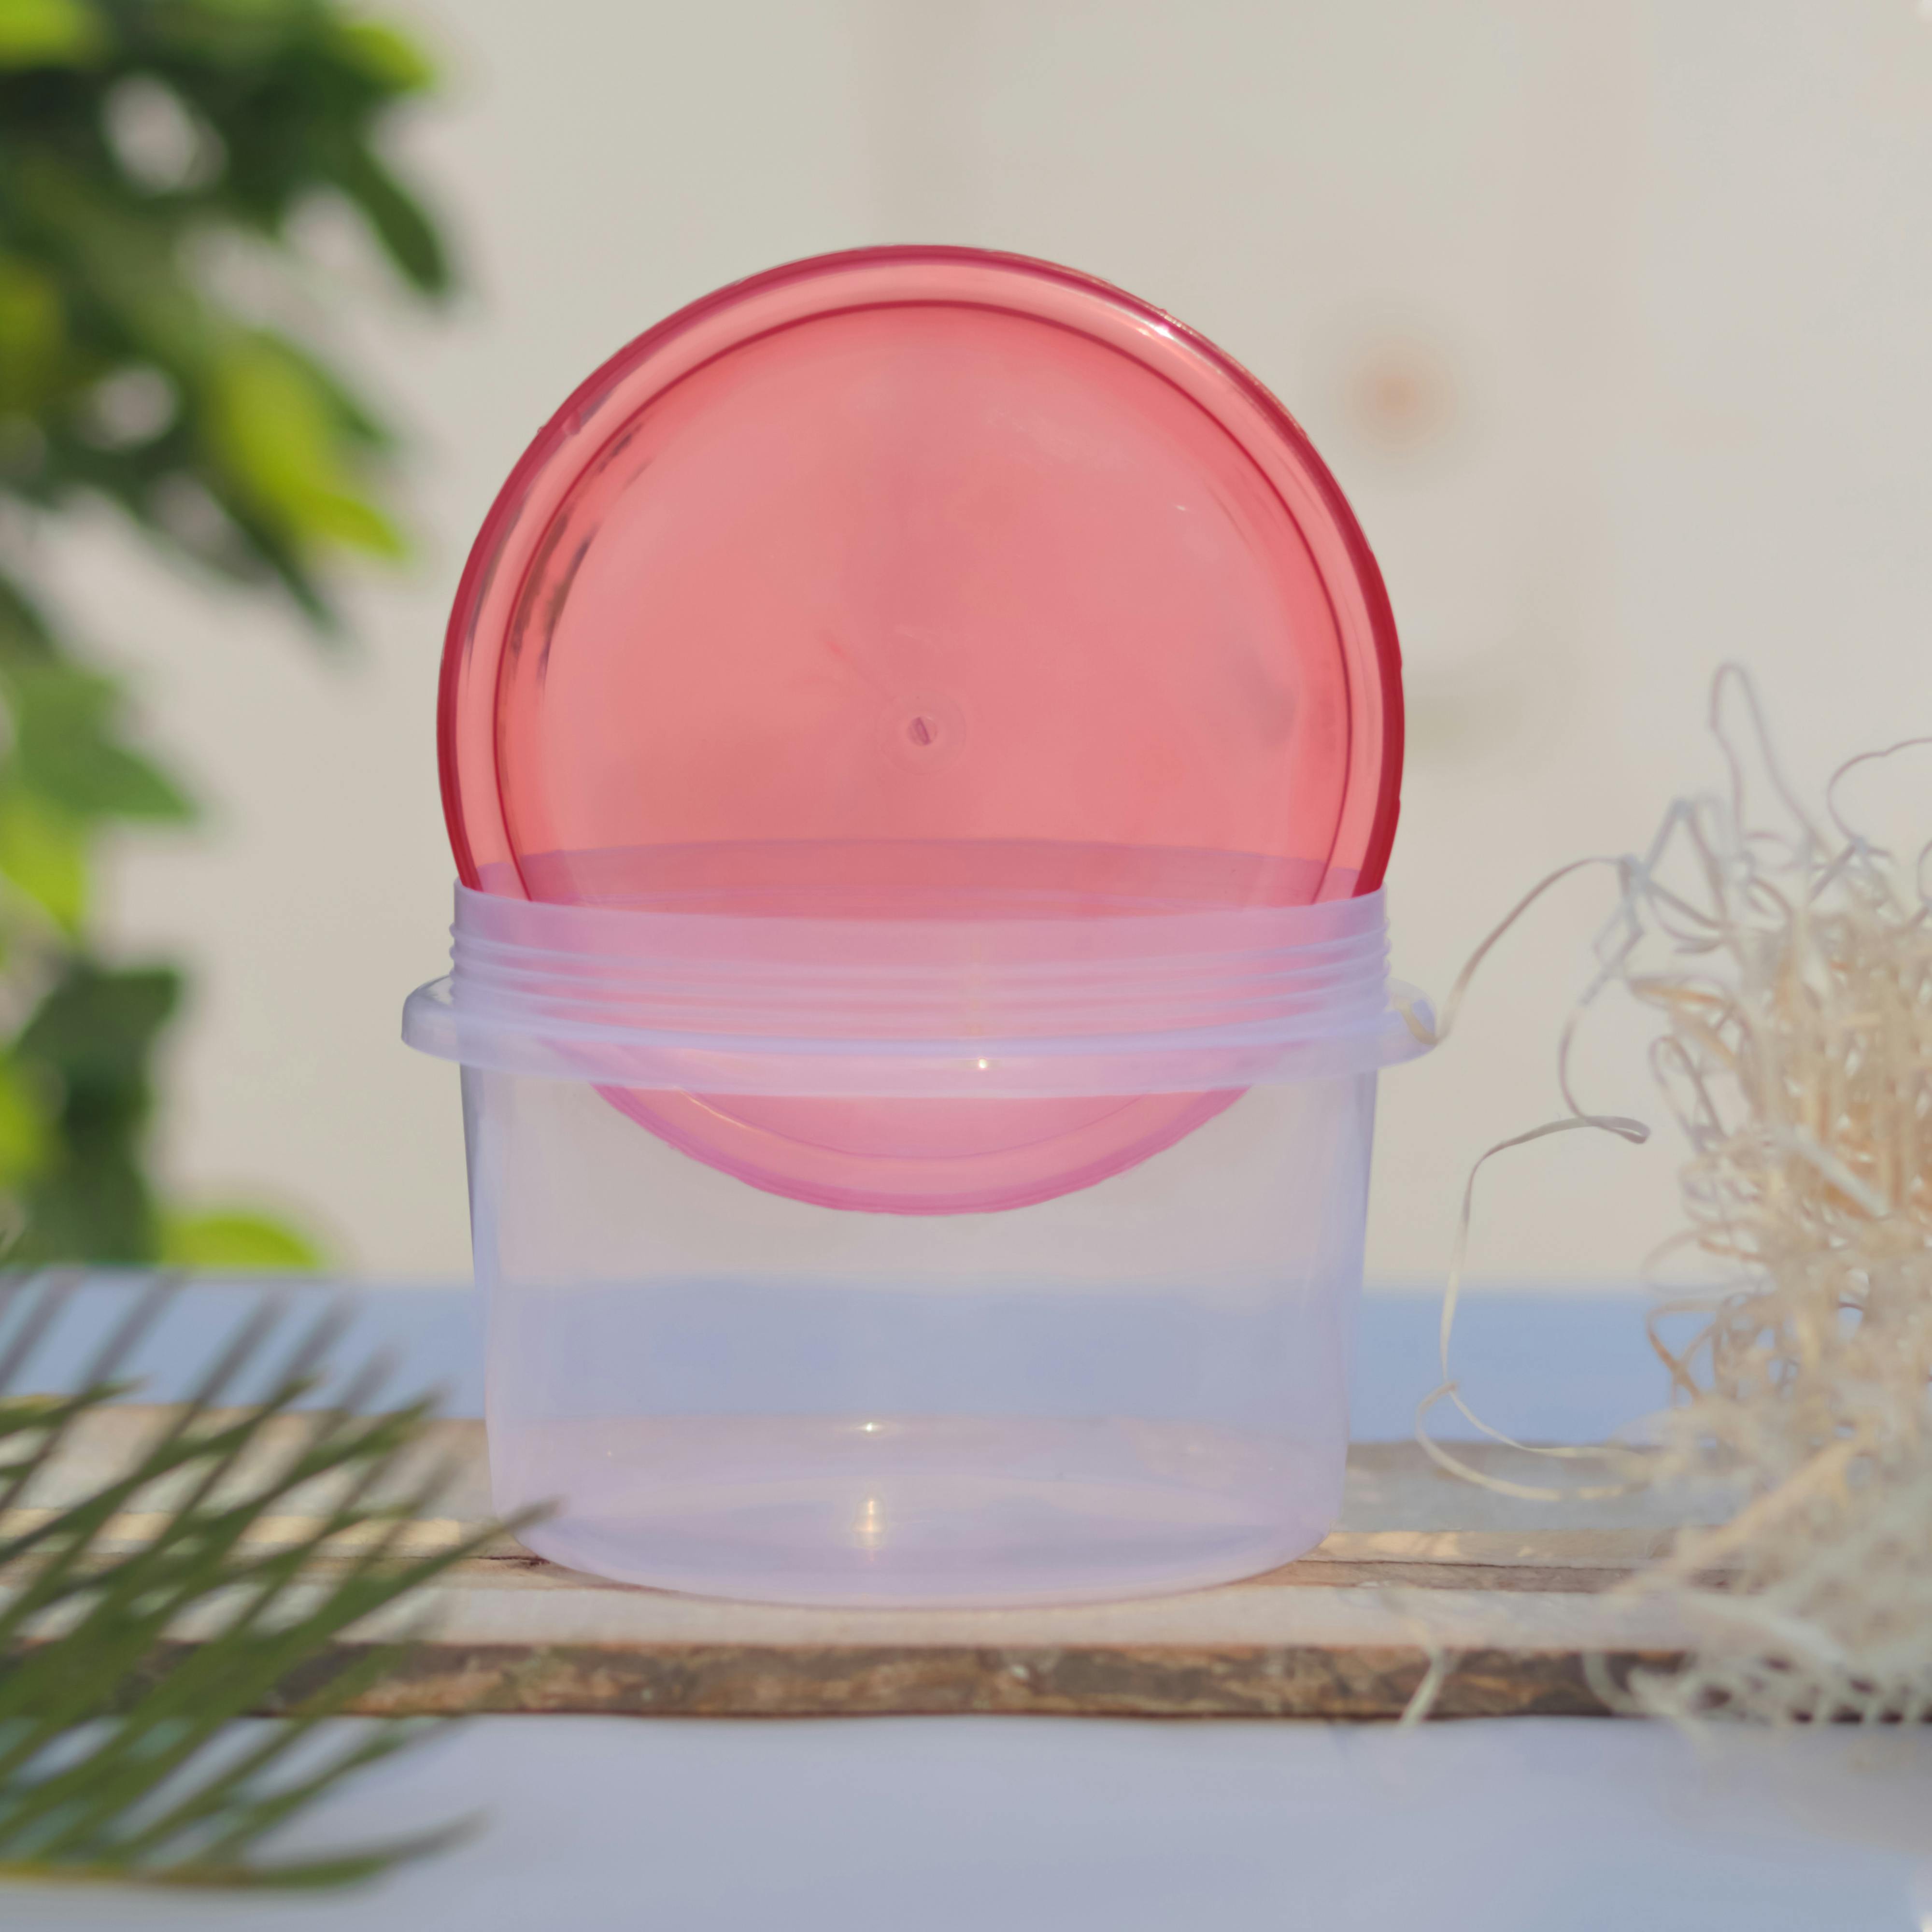 Pink container isolated Stock Photo by ©vahekatrjyan 100638018